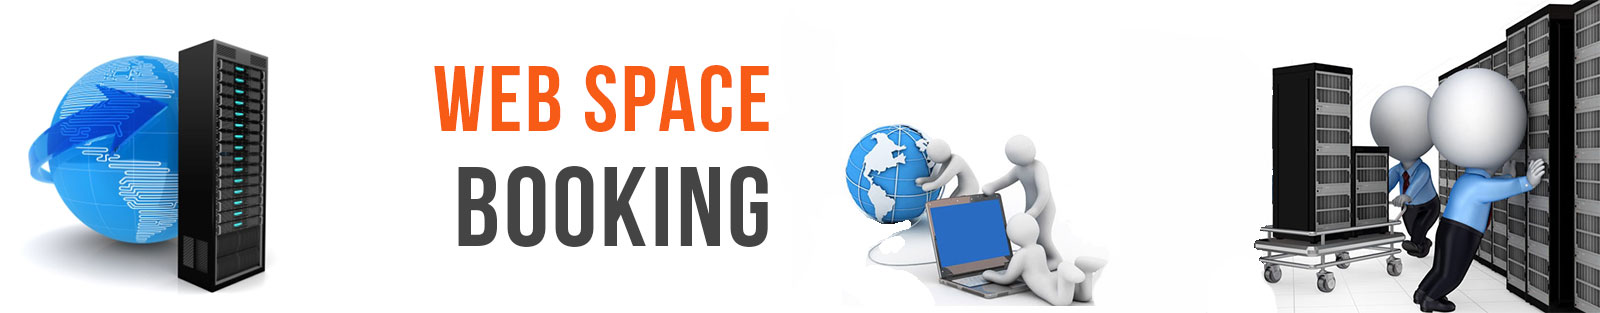 Web Space Booking